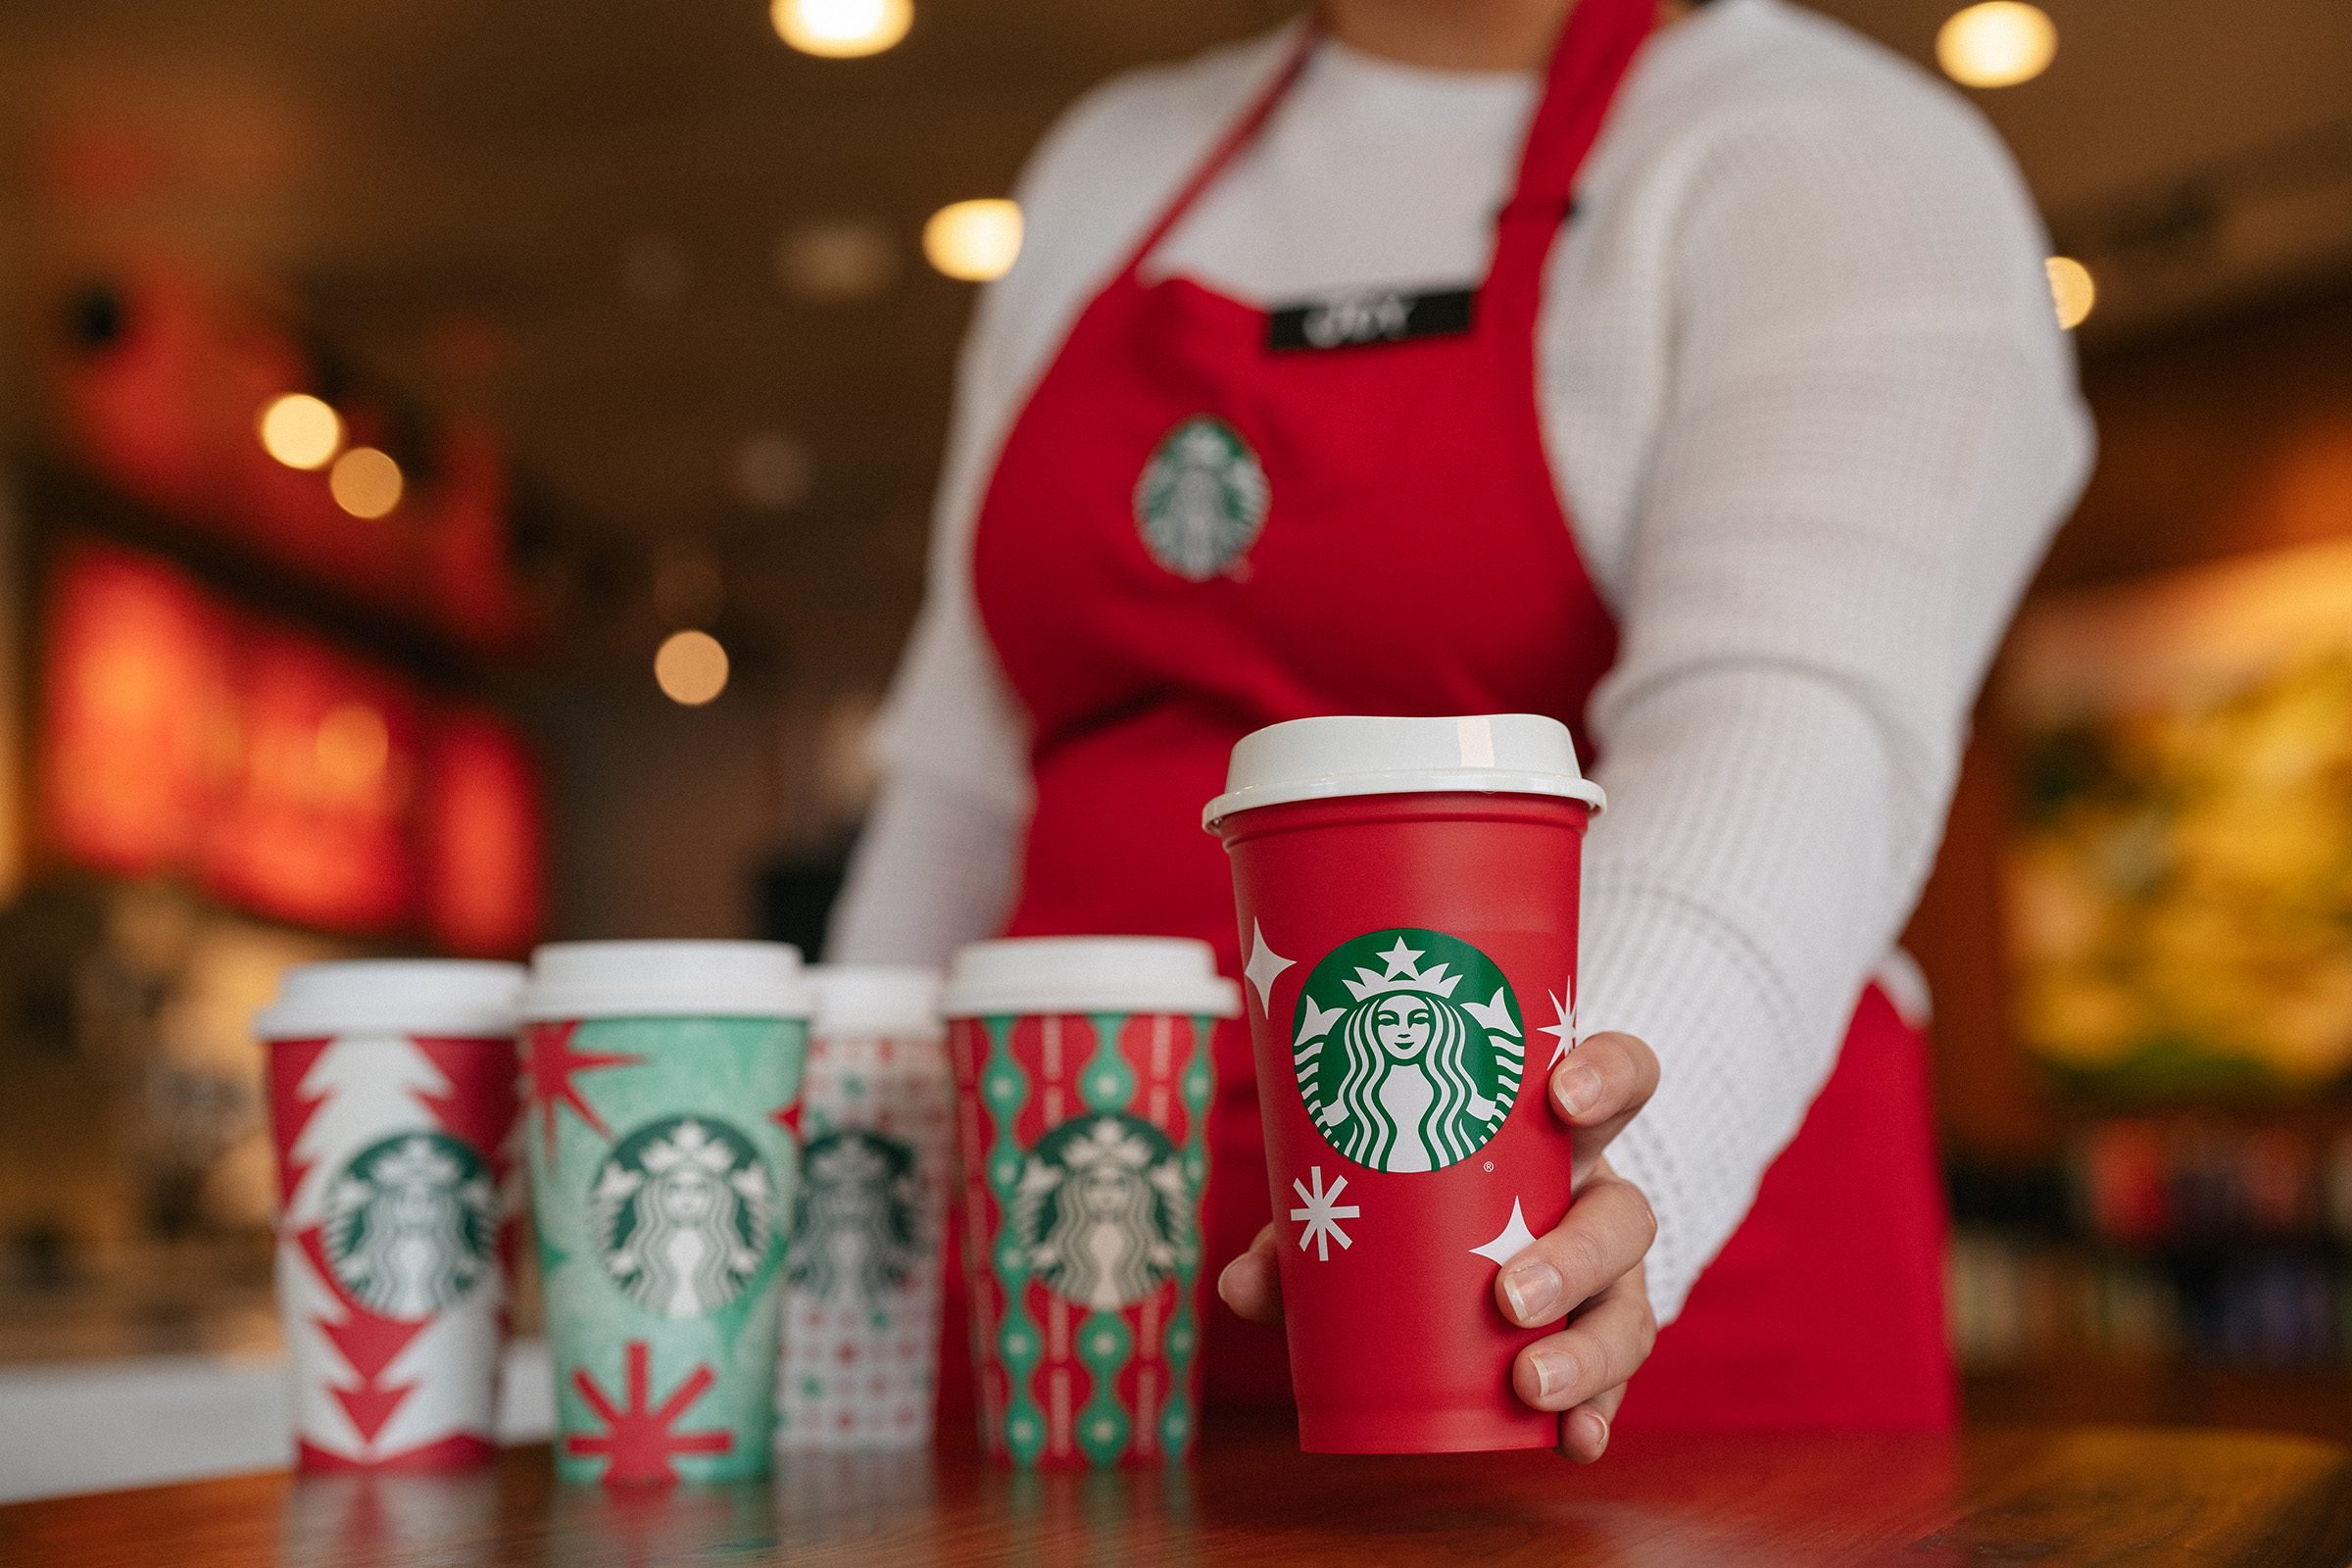 https://www.tasteofhome.com/wp-content/uploads/2021/11/Starbucks-Reusable-Red-Cup-Full-Lineup-DH-Resize-TOH.jpg